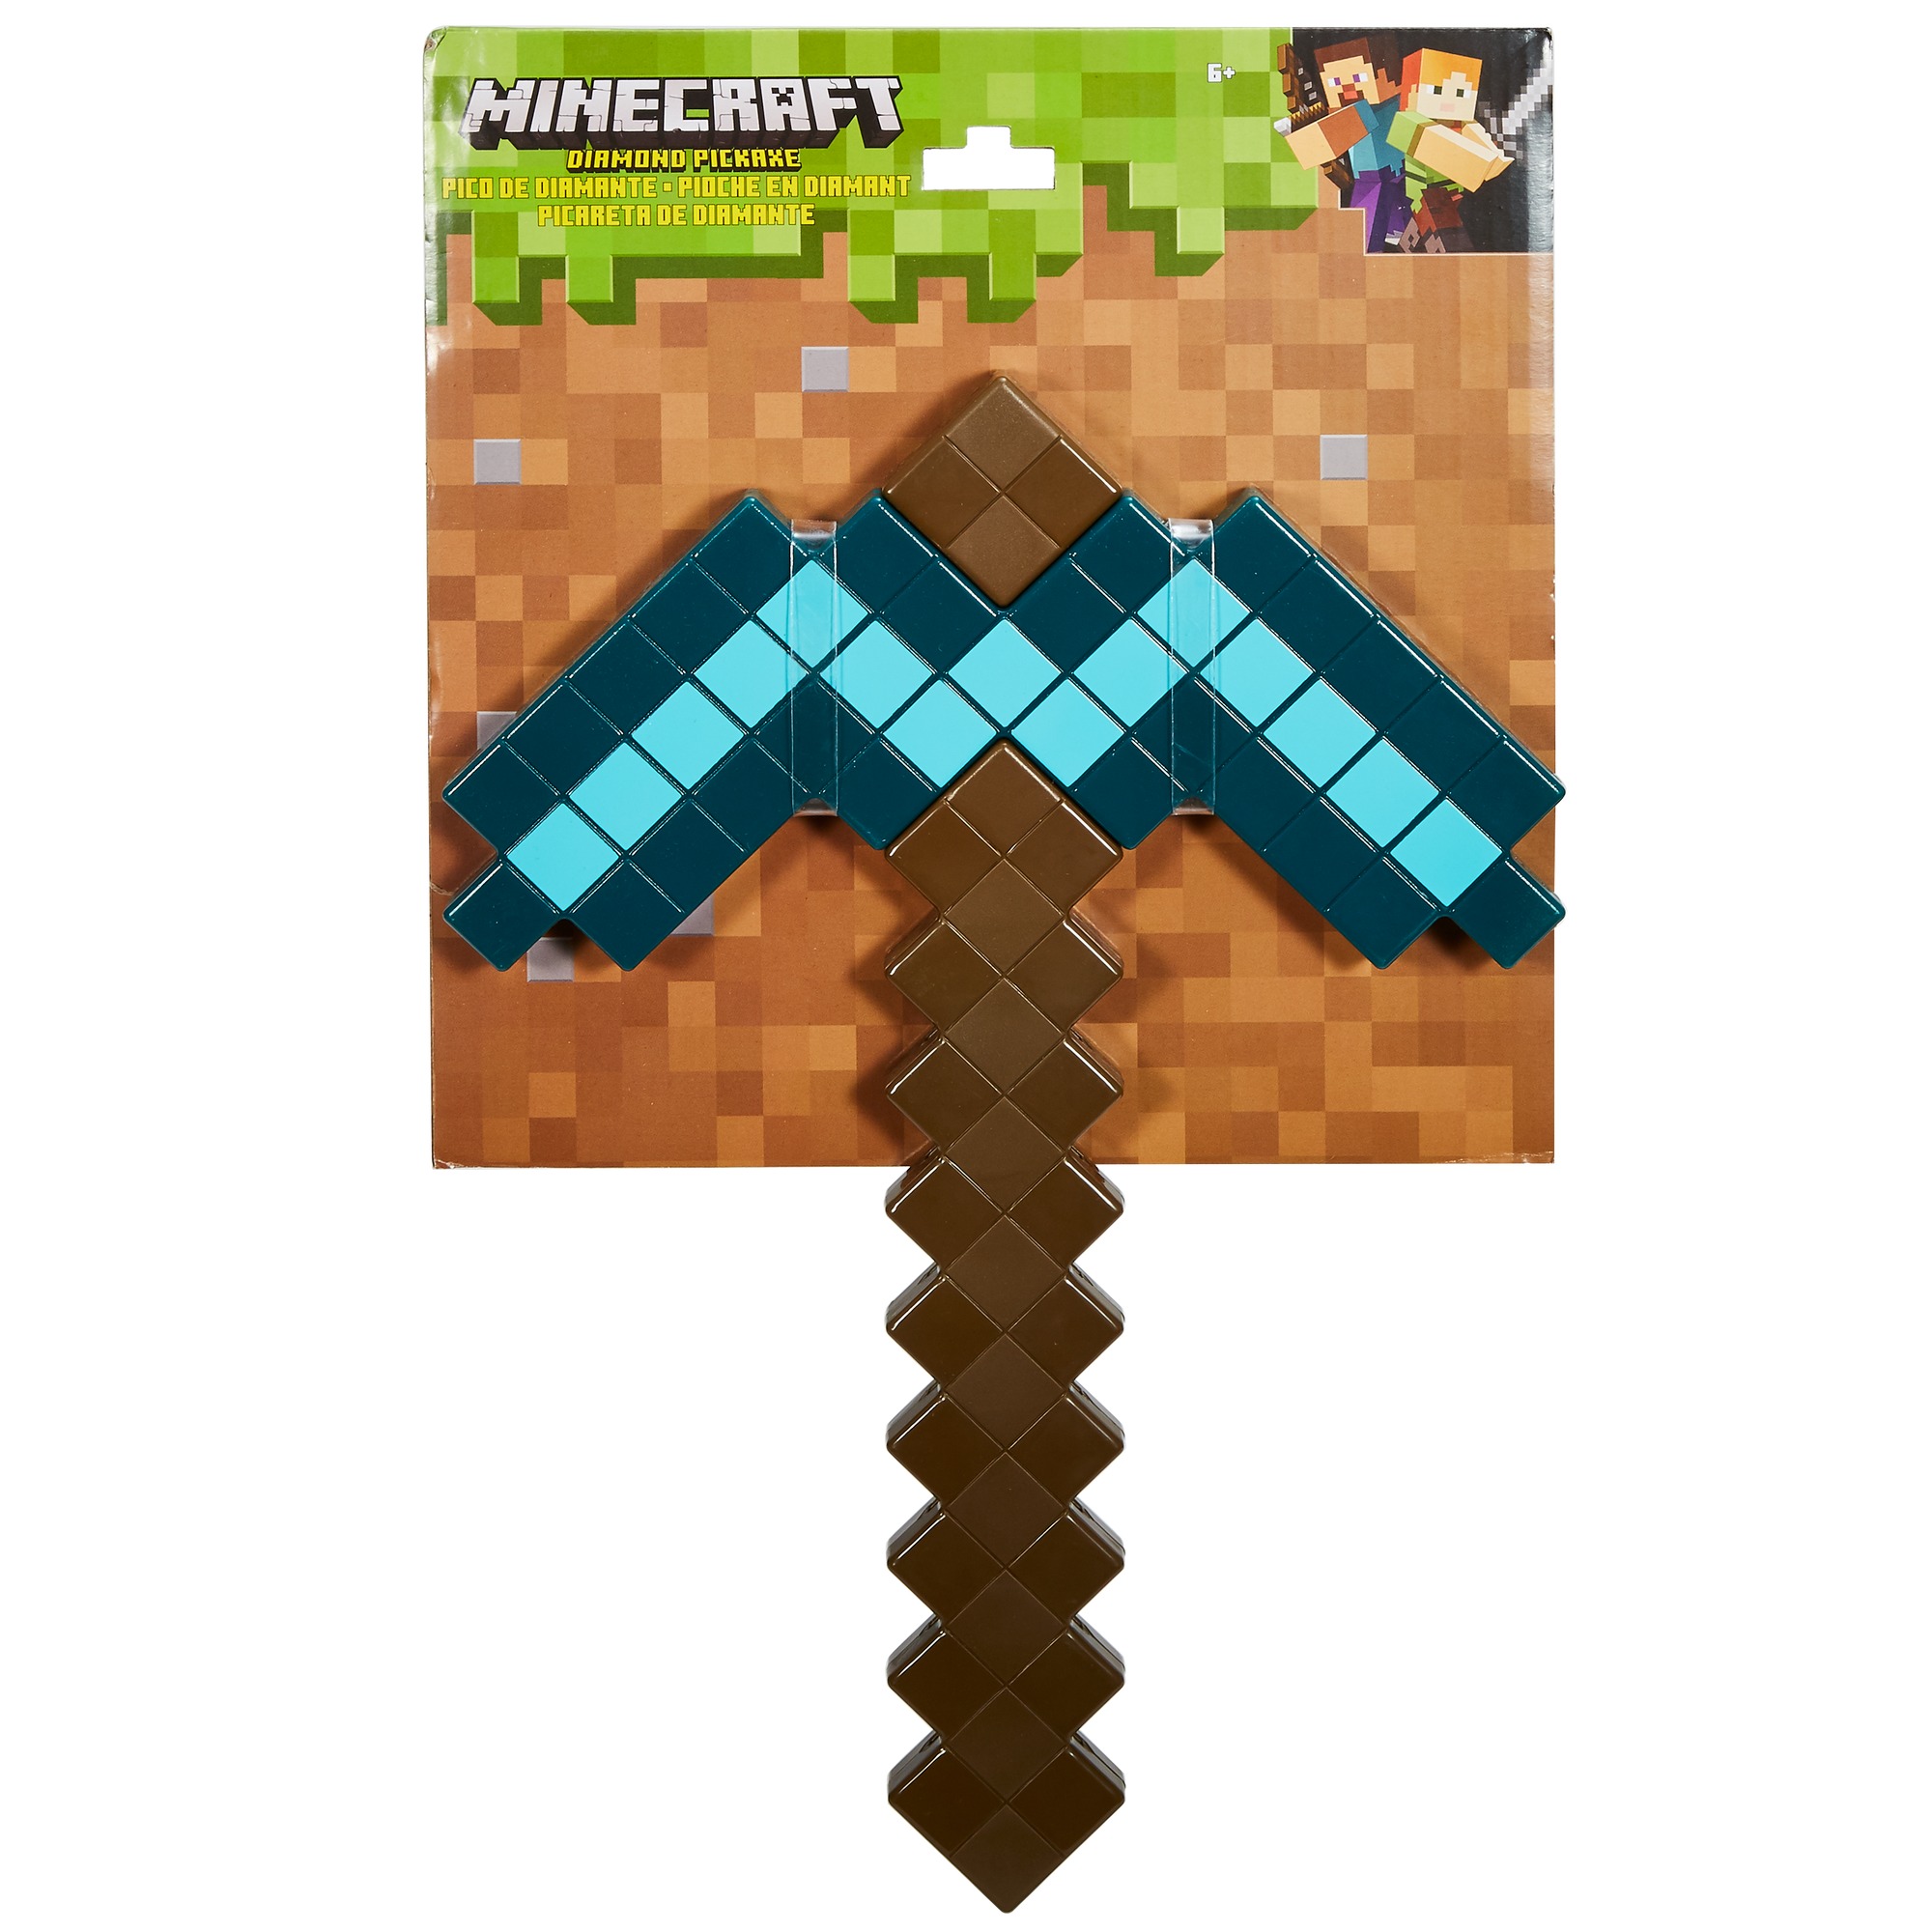 Minecraft Diamond Pickaxe, Life-Sized for Role-Play Fun - image 4 of 4